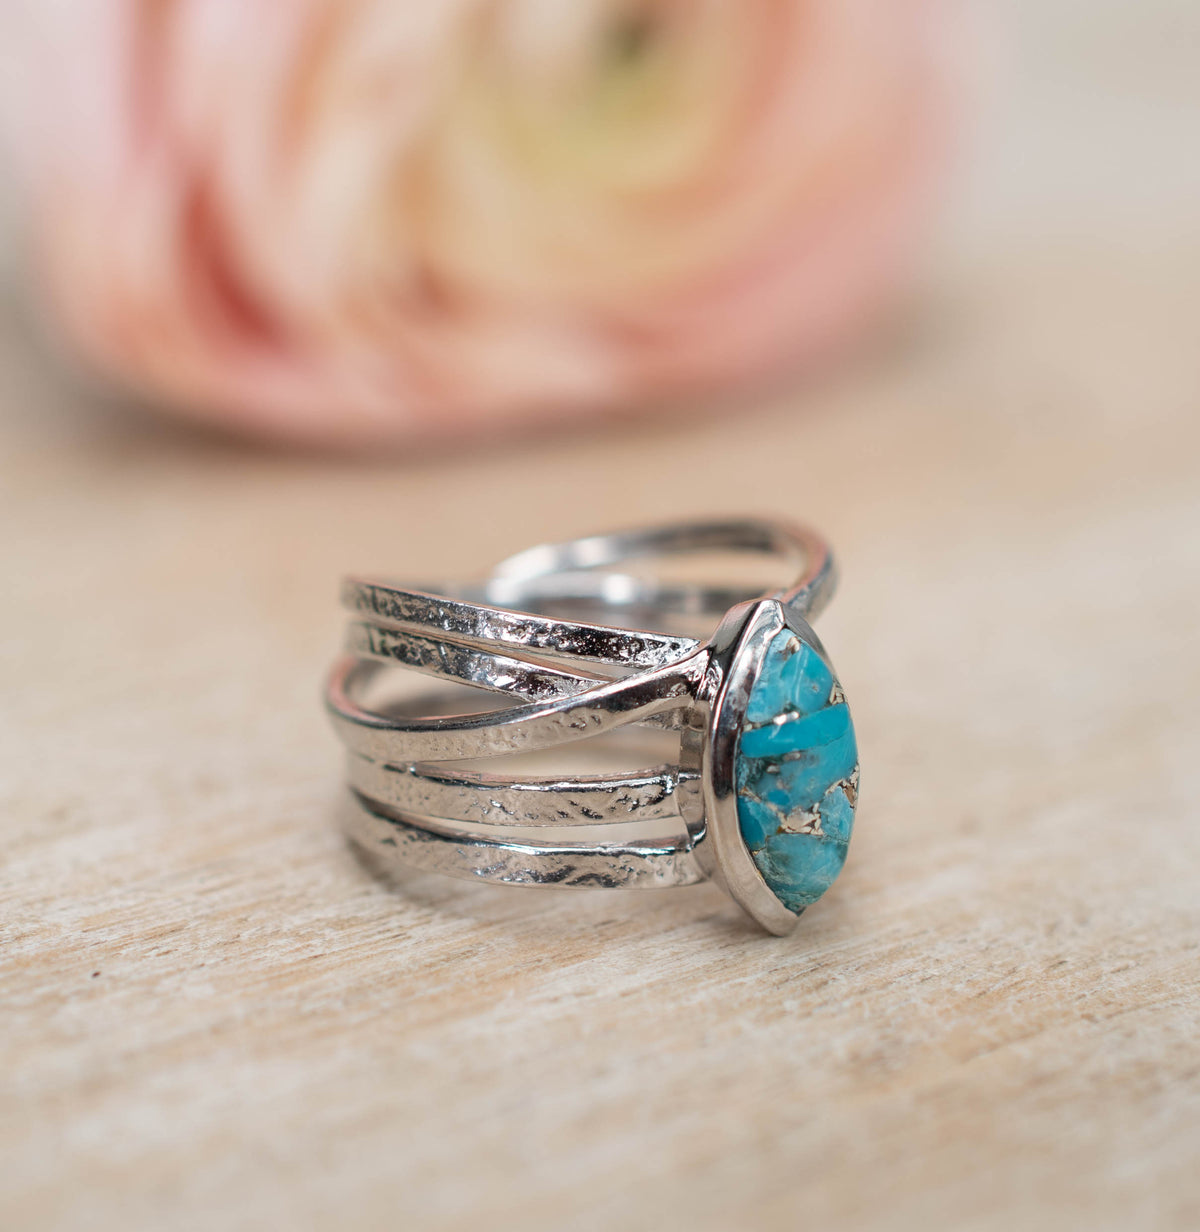 Turquoise Silver Plated Ring * Silver Ring *Statement Ring *Gemstone *Copper Turquoise Ring* Natural *Organic Ring * Ocean* Blue Ring BJR133